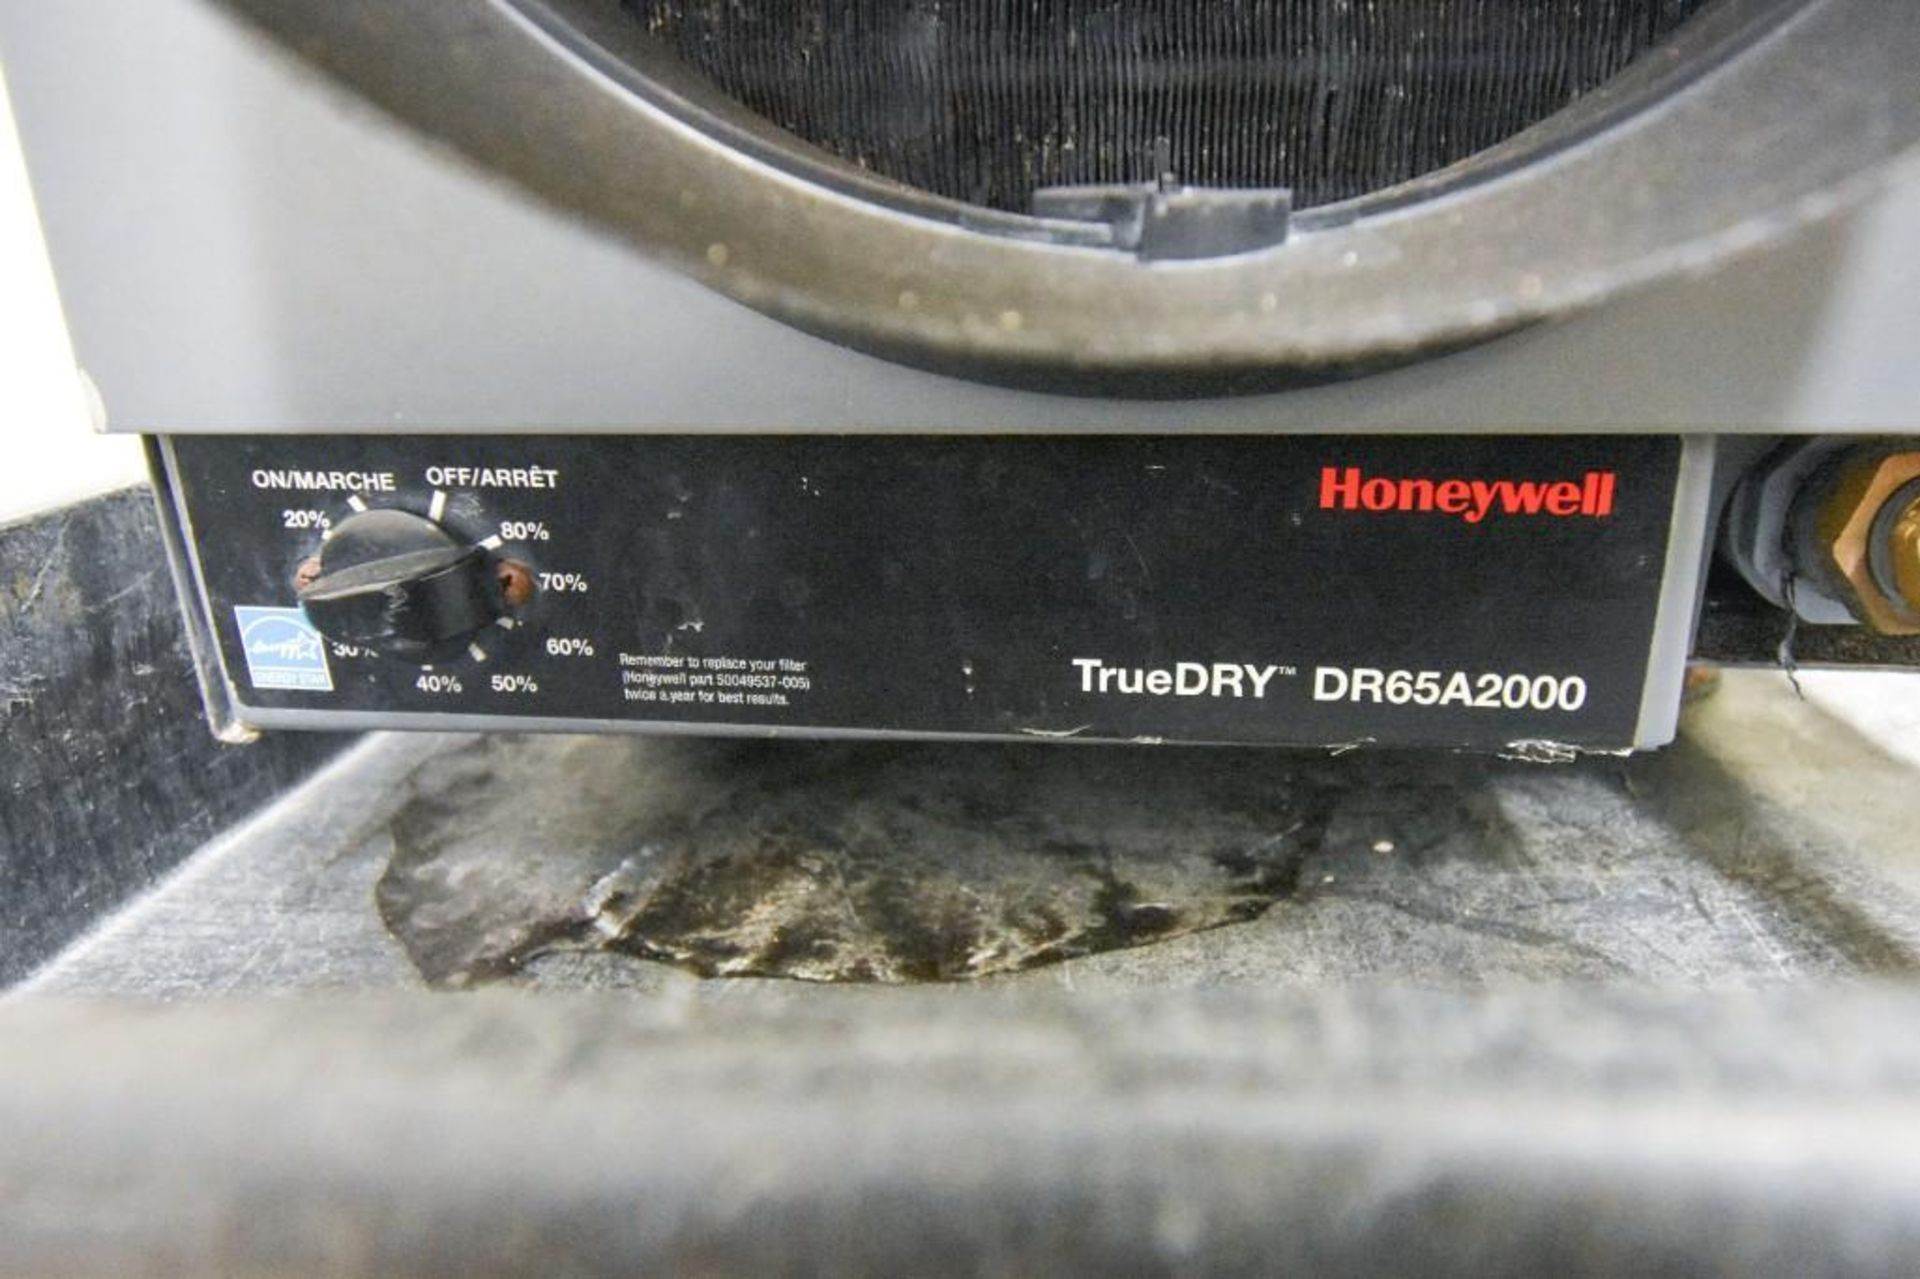 Honey Well TruDry DR65A2000 - Image 2 of 4